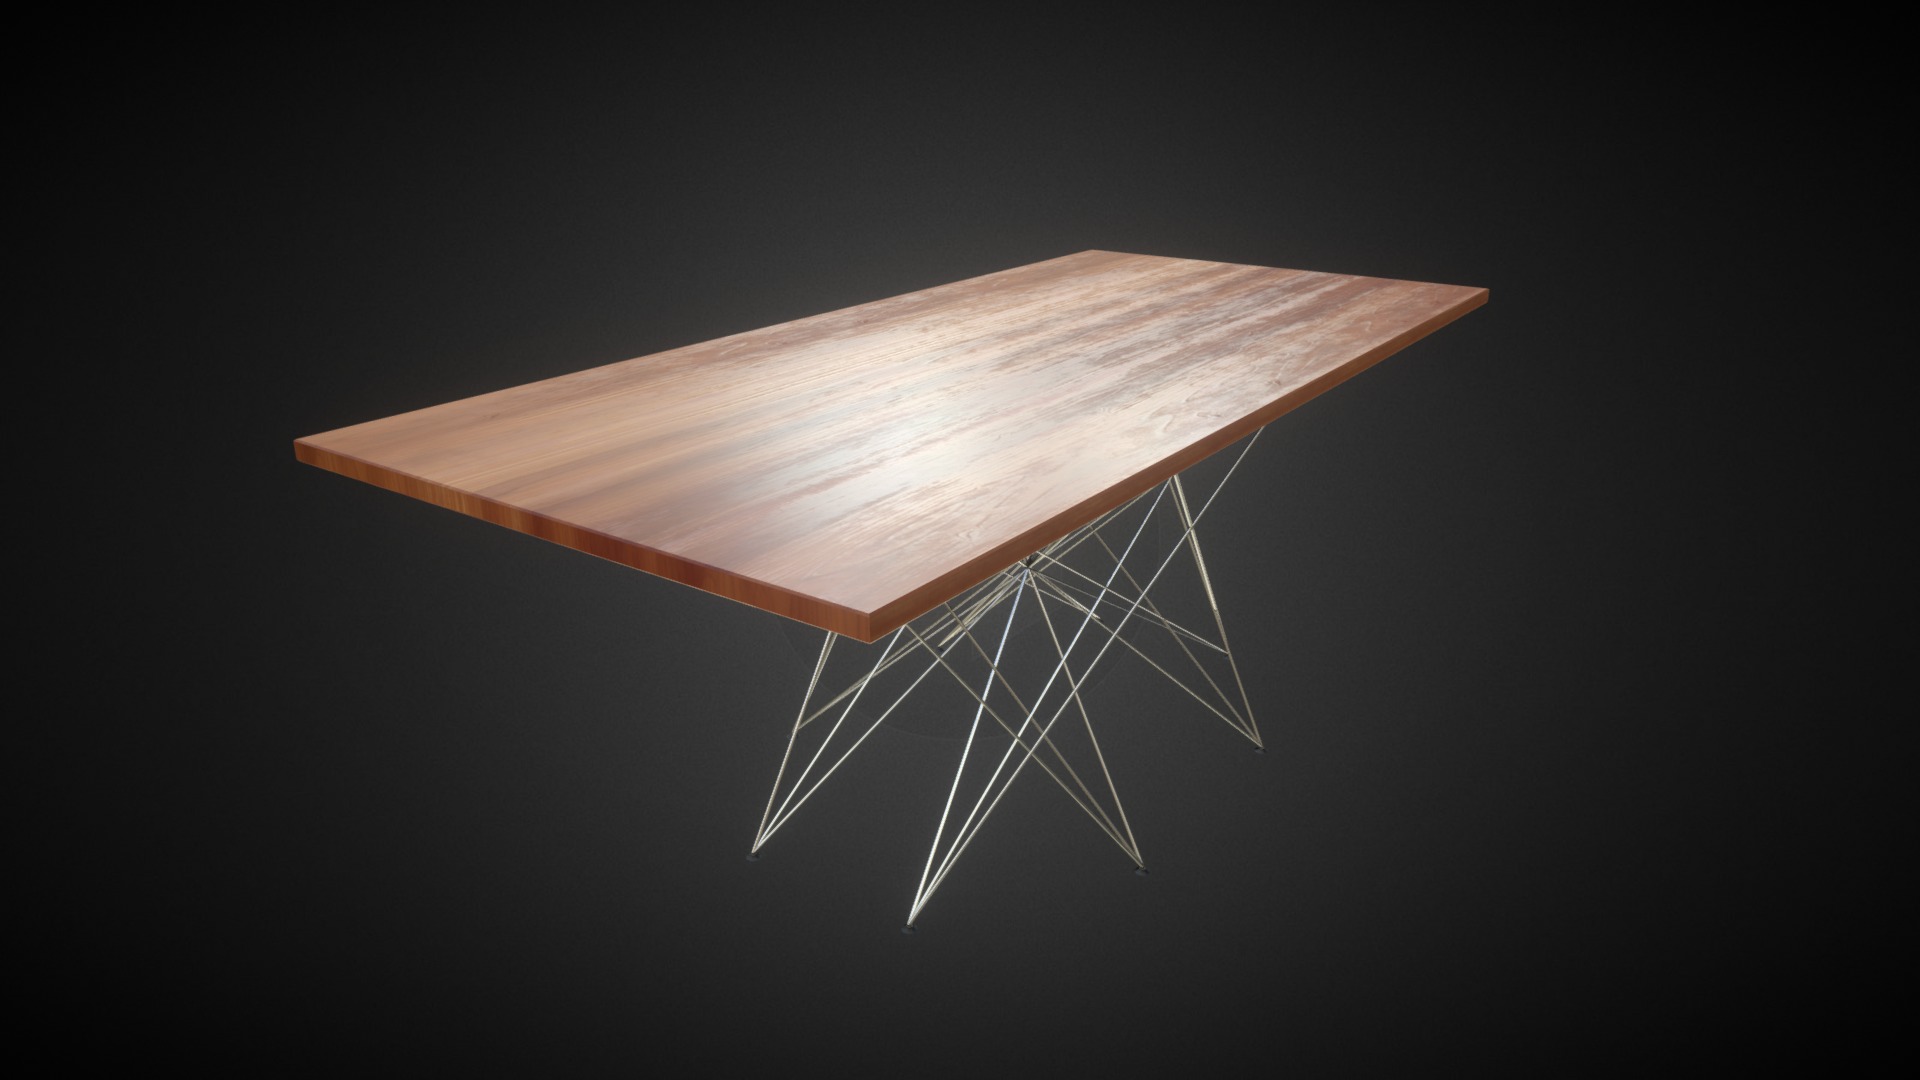 3D model Table001 - This is a 3D model of the Table001. The 3D model is about a wooden table with a metal frame.